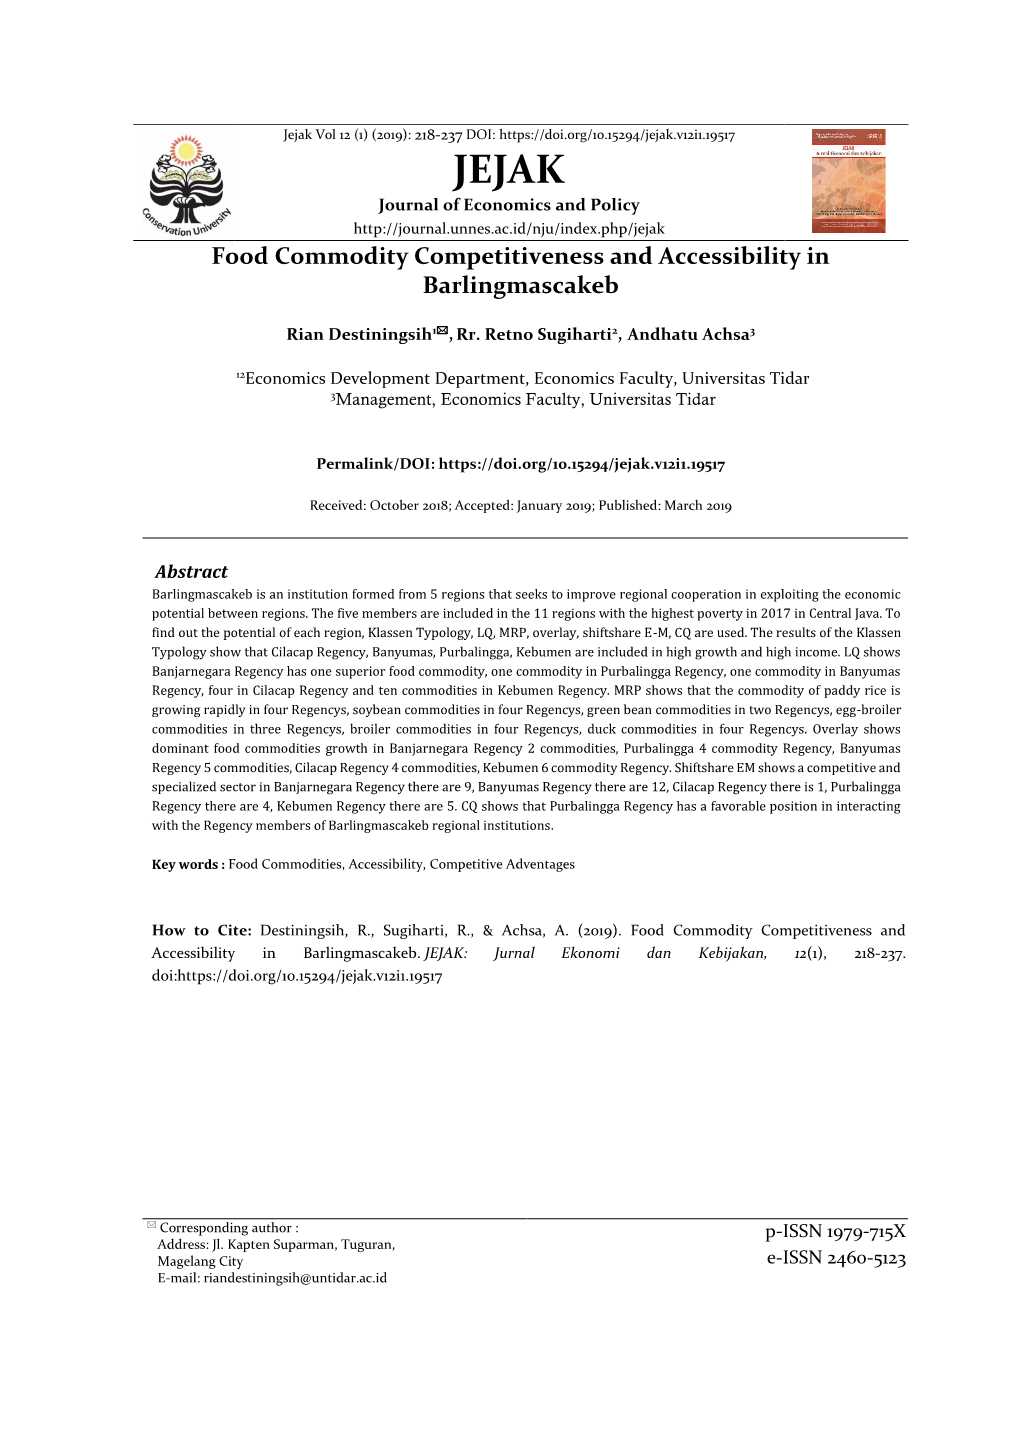 Food Commodity Competitiveness and Accessibility in Barlingmascakeb